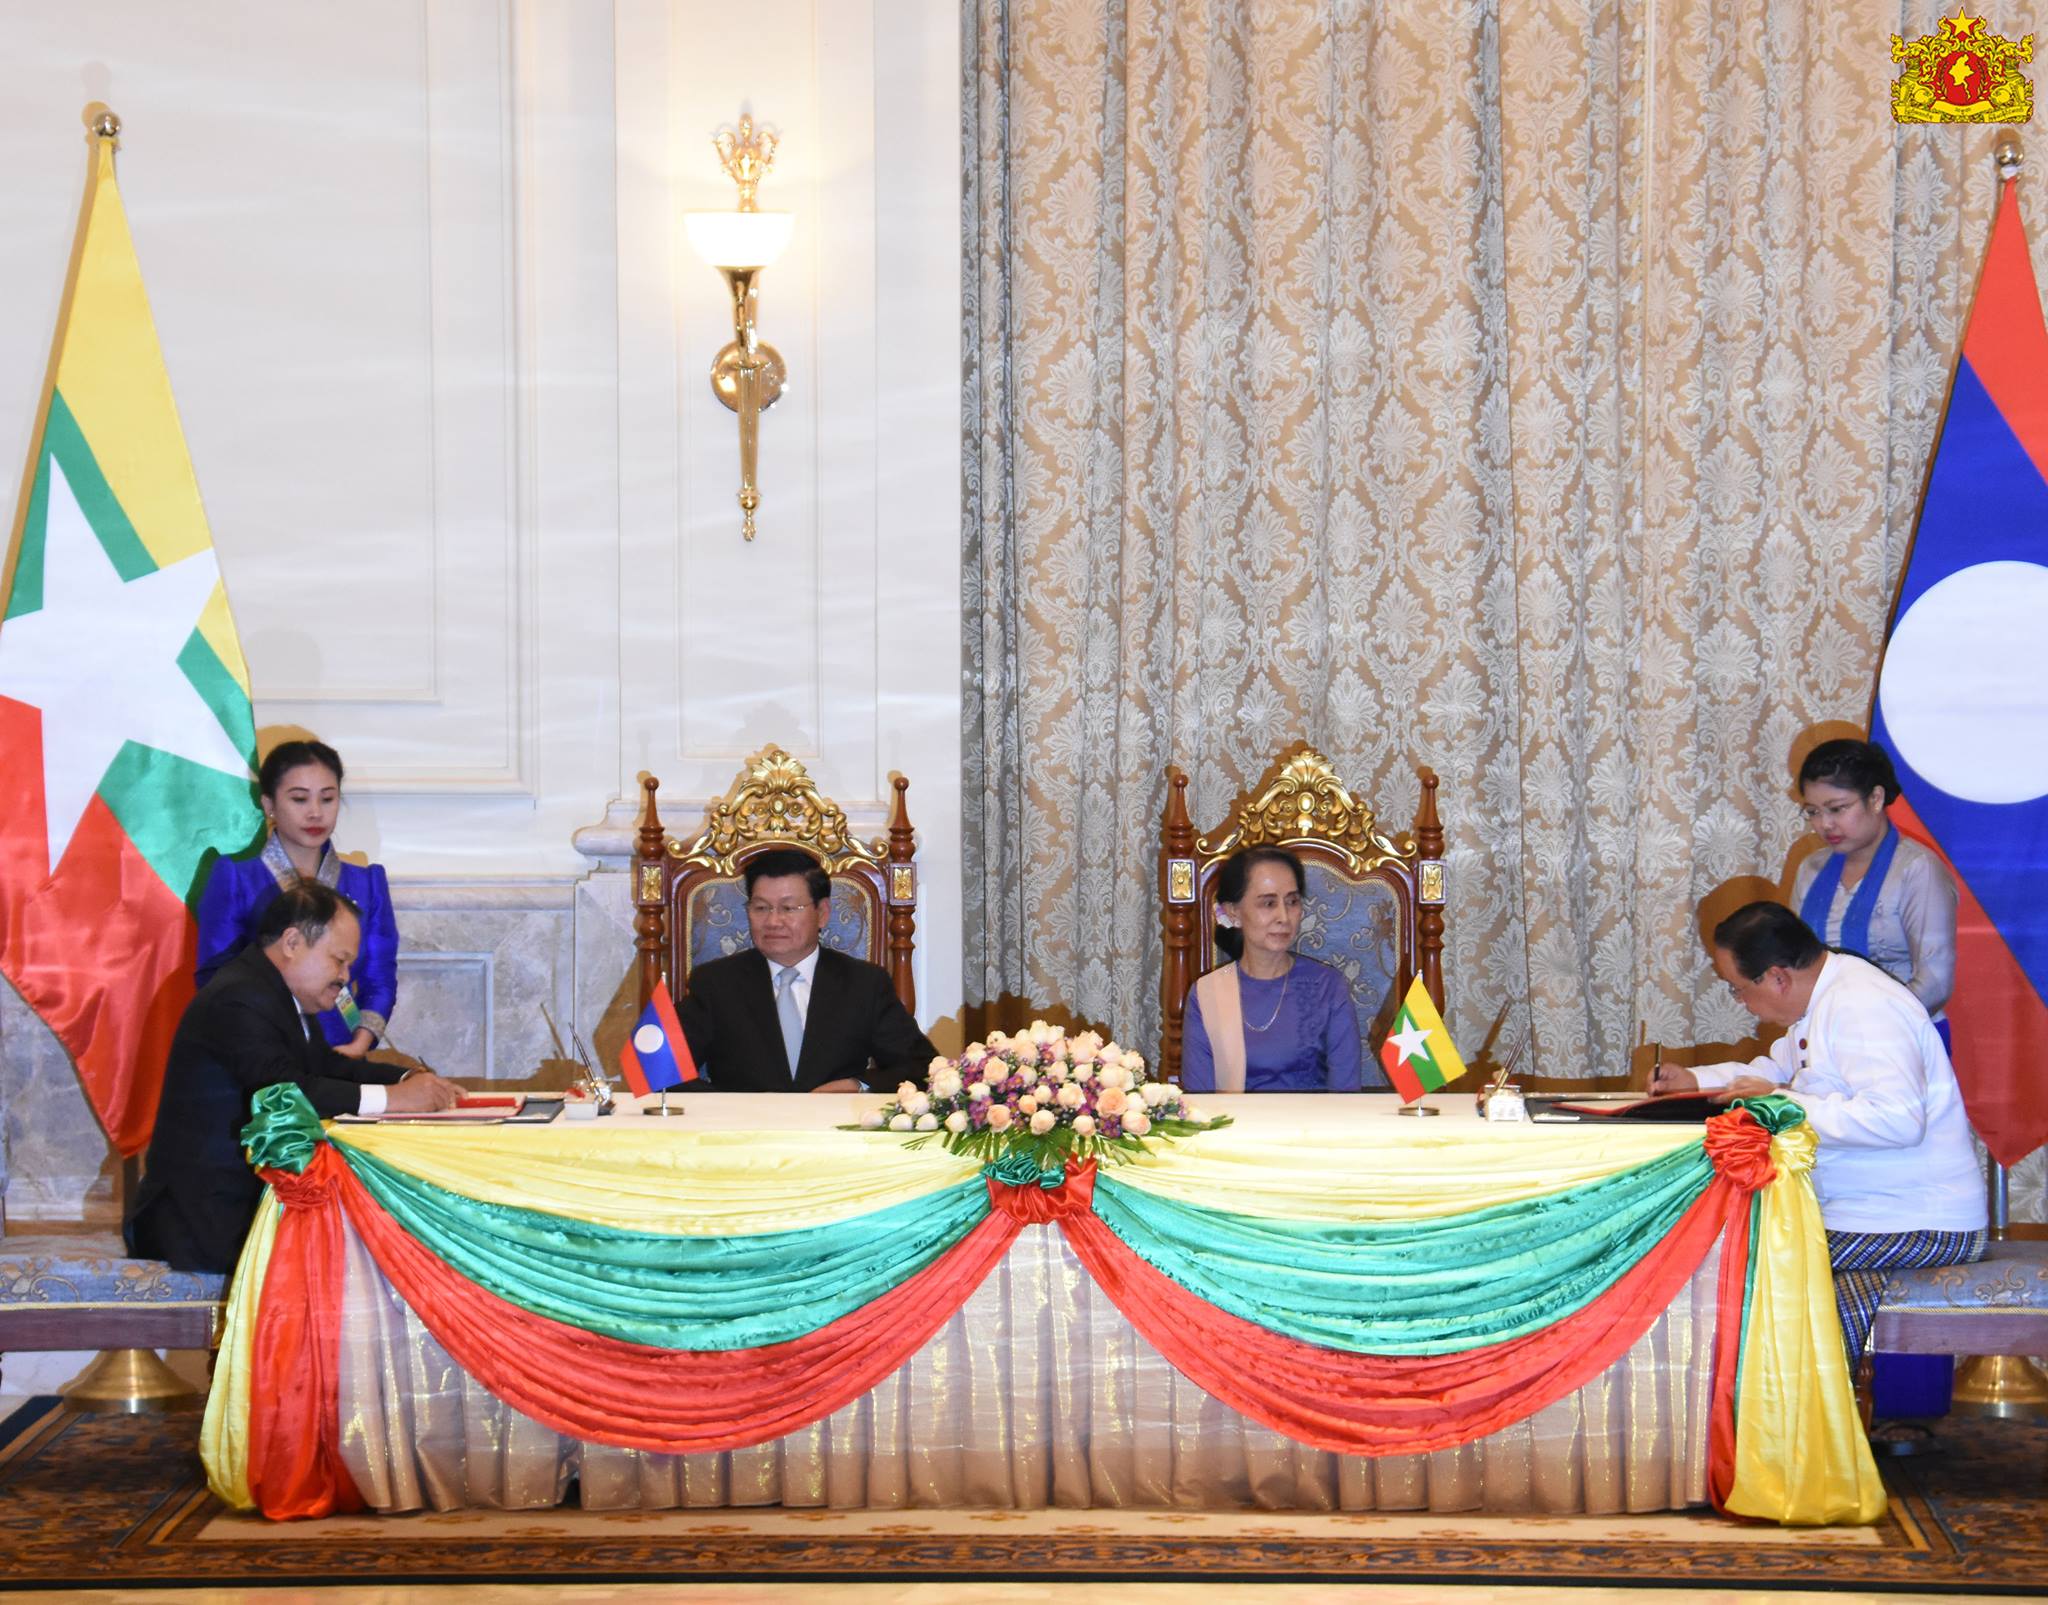 State Counsellor and Laos Prime Minister in bilateral talks in Nay Pyi Taw